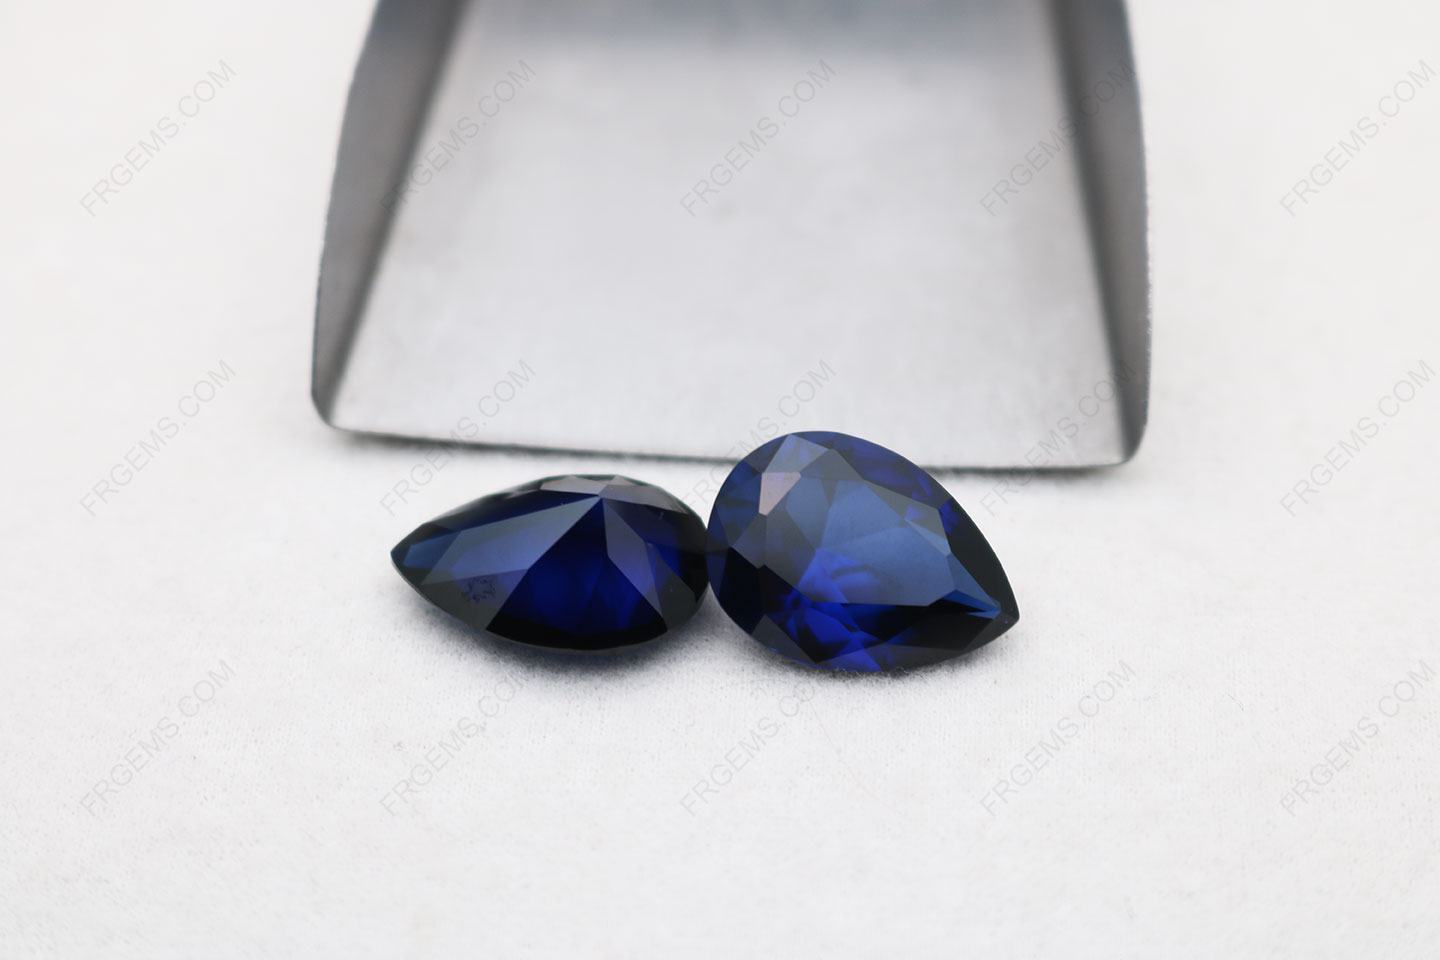 Synthetic Corundum Blue Sapphire #34 Pear Shape Faceted Cut 18x13mm gemstones IMG_5871